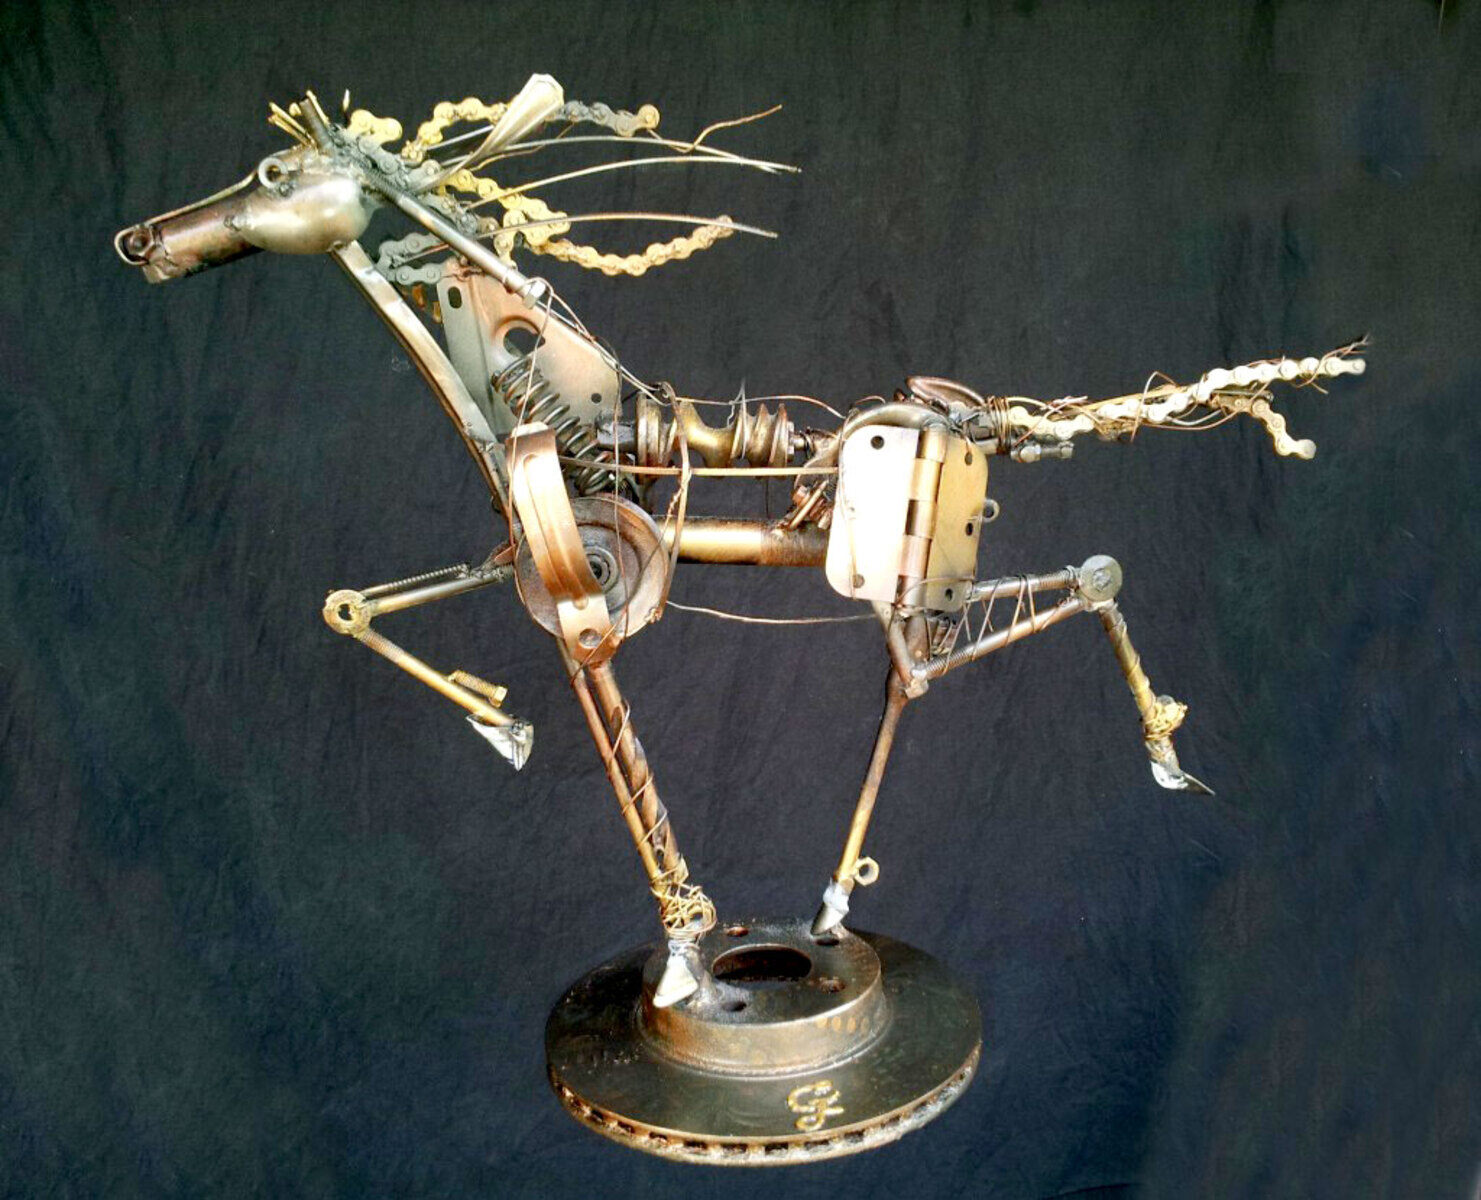 How To Make A Metal Sculpture